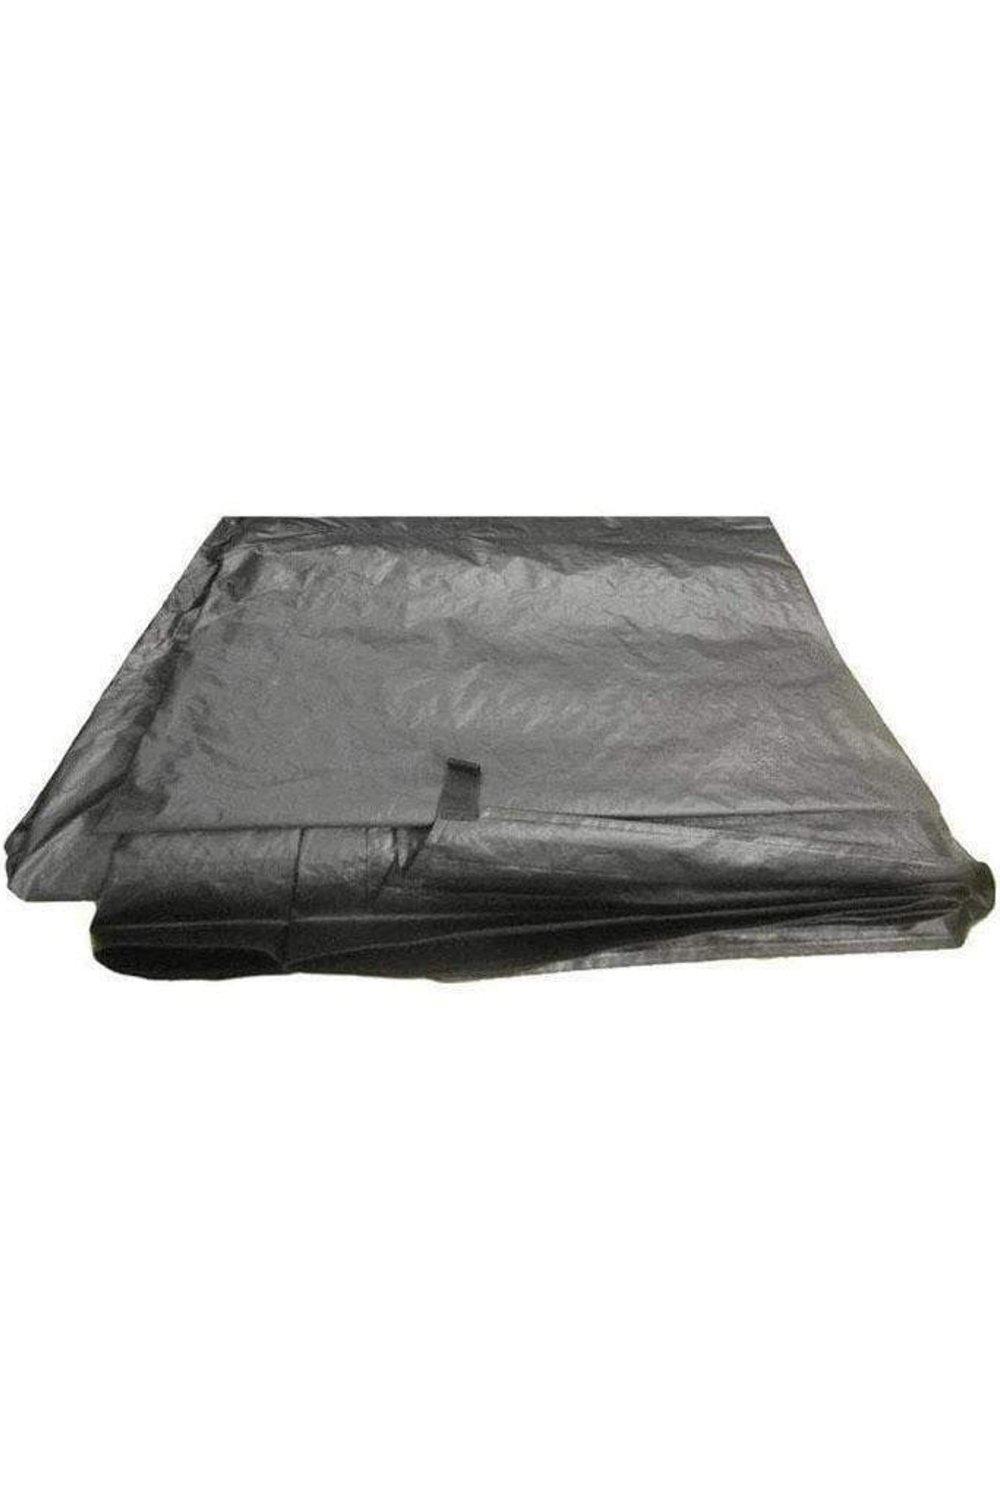 WRAP- Footprint Groundsheet (with Pegs)